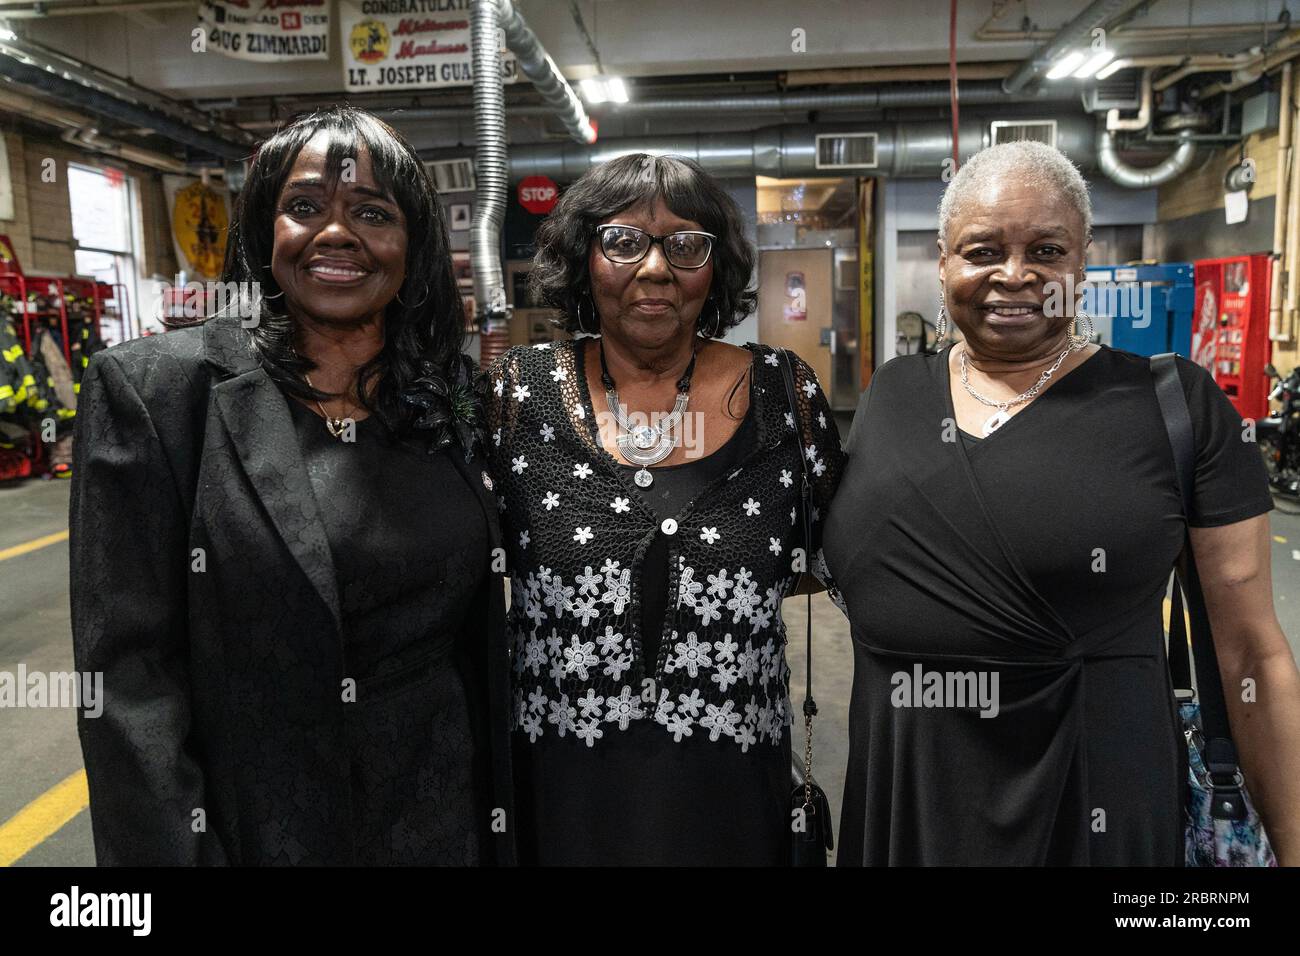 Gwendolyn Webb, Gwendolyn Gamble, Gloria Washington attend press conference on anniversary of Children's Crusade or Children's March as it is known at FDNY Engine 1, Ladder 24 station in New York on July 10, 2023. March was held in Birmingham, Alabama on 2 - 10 May, 1963 and was attended by more than 5,000 school children, 3 of them joined this press conference: Gloria Washington, Gwendolyn Gamble, Gwyndolyn Webb. Members of FDNY at the time stood up against the City of Birmingham fire department using force against children. (Photo by Lev Radin/Sipa USA) Stock Photo